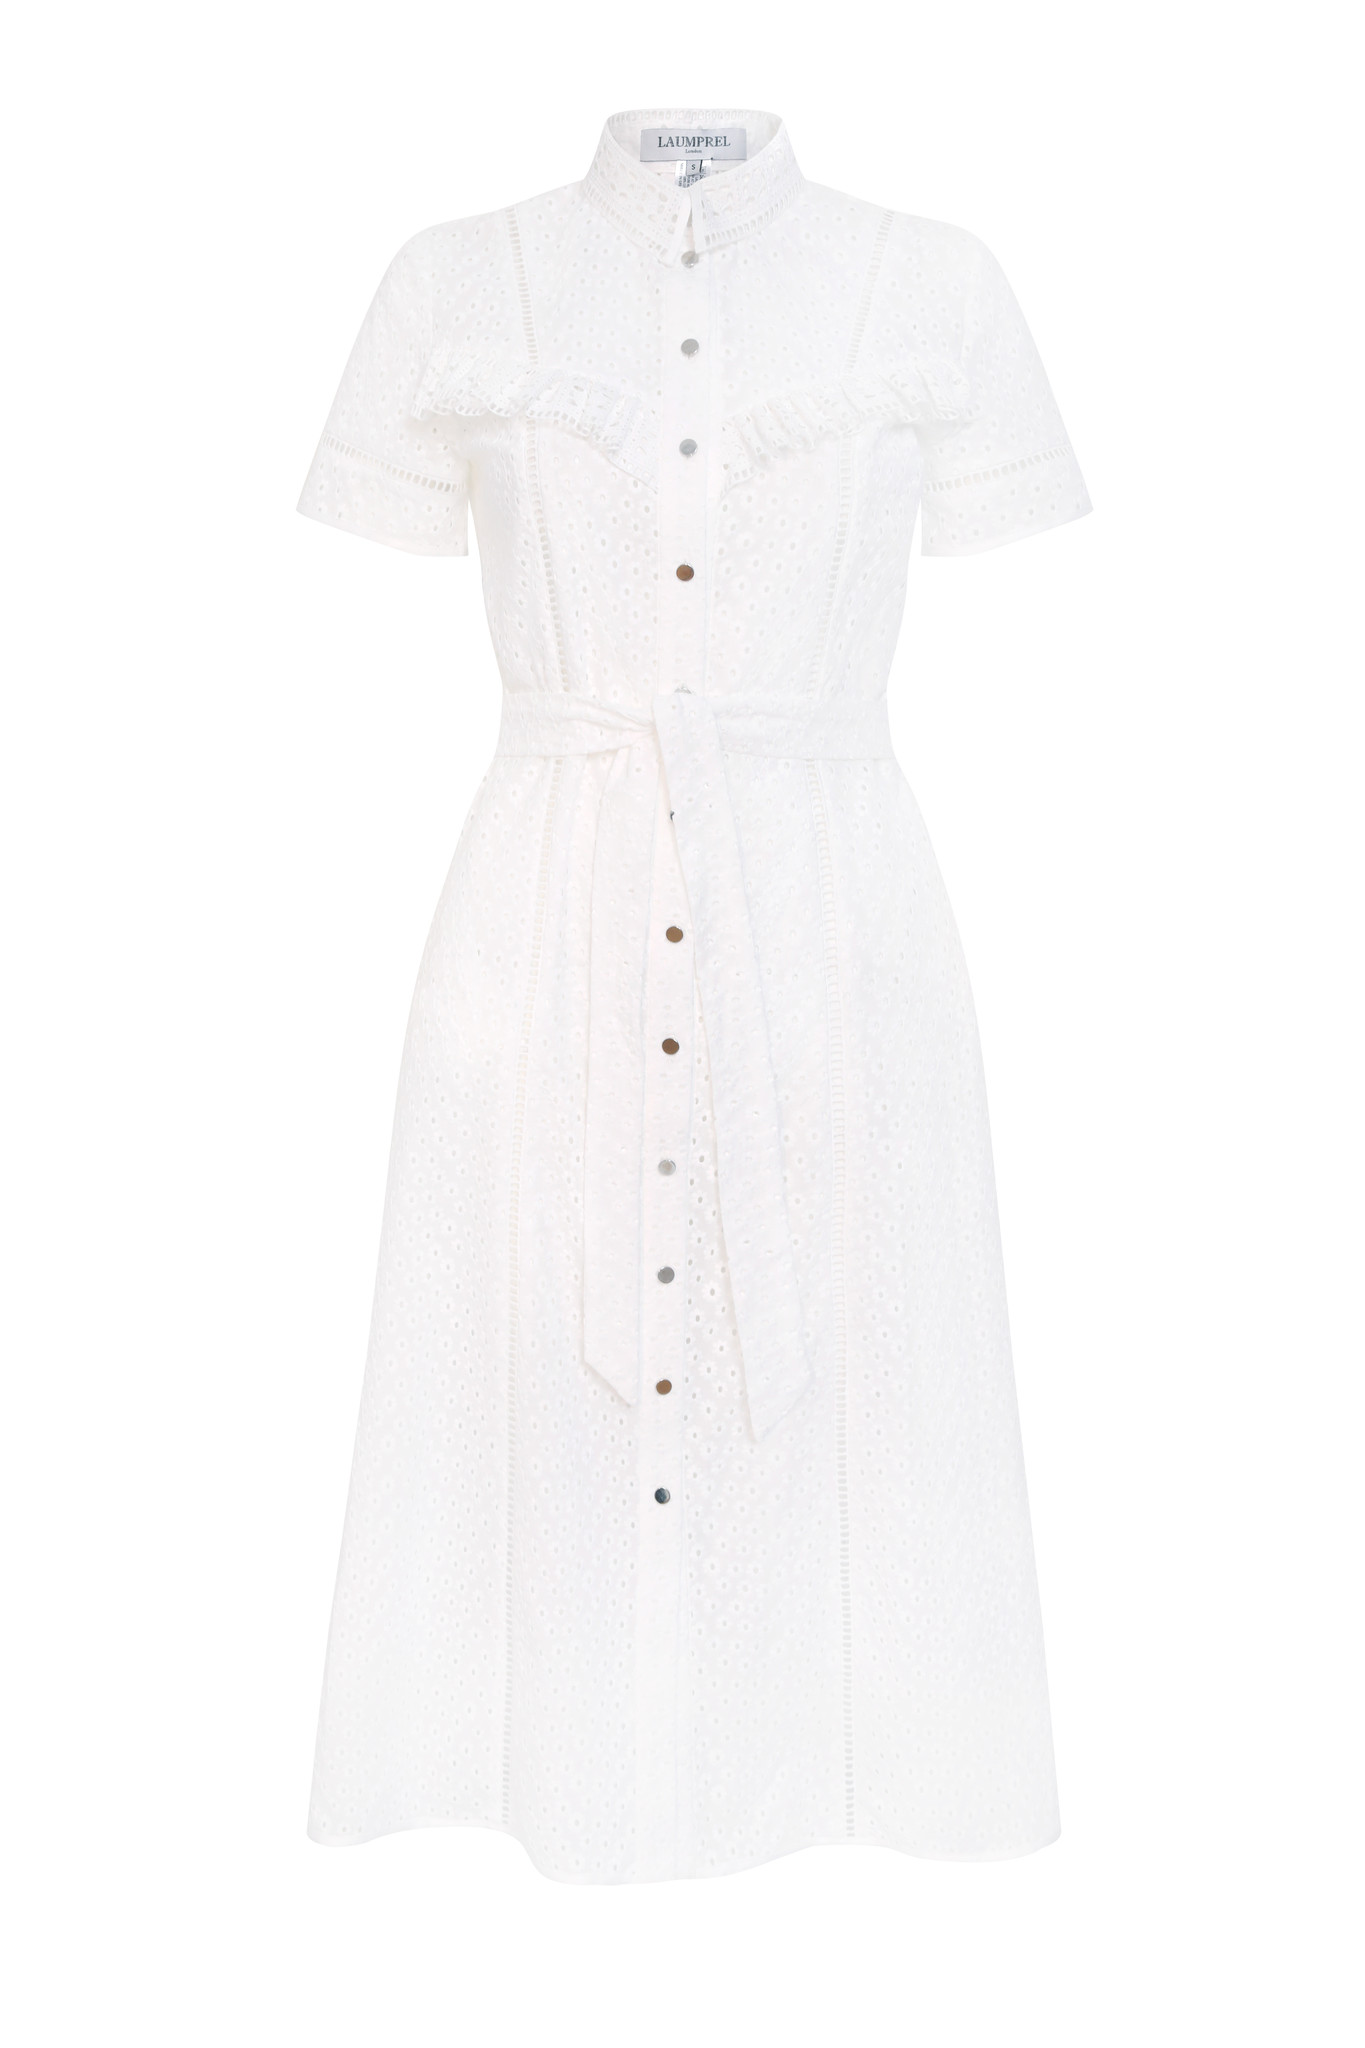 Romina broderie Anglaise cotton dress